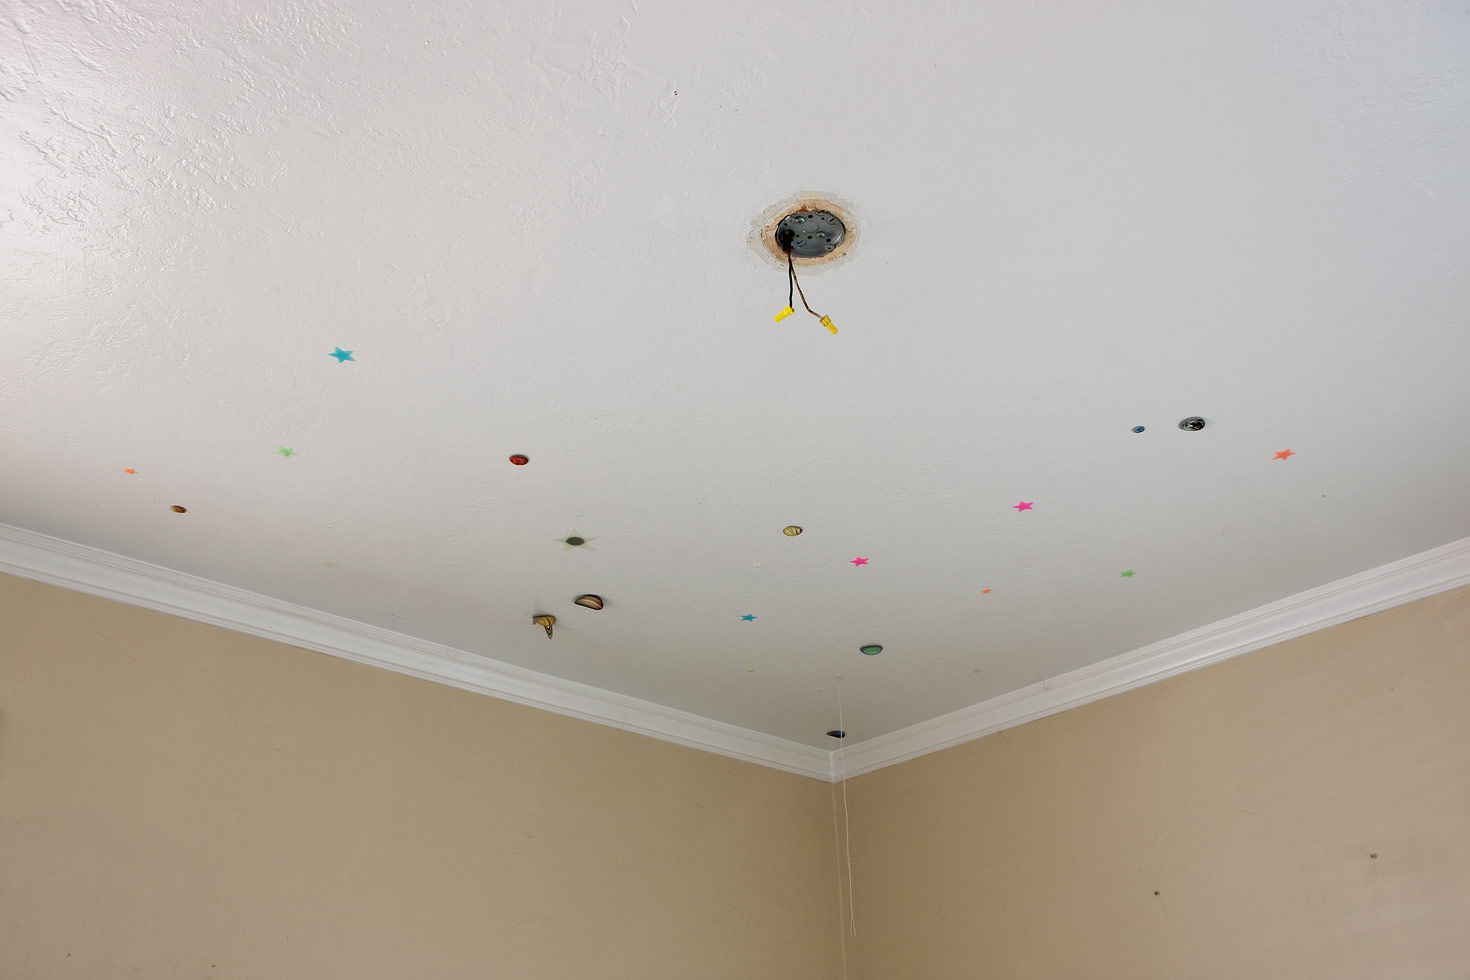 Foreclosure, USA: Galaxy, 2009

Plastic stars, solar system stickers, and a missing light fixture on the ceiling of a foreclosed home.